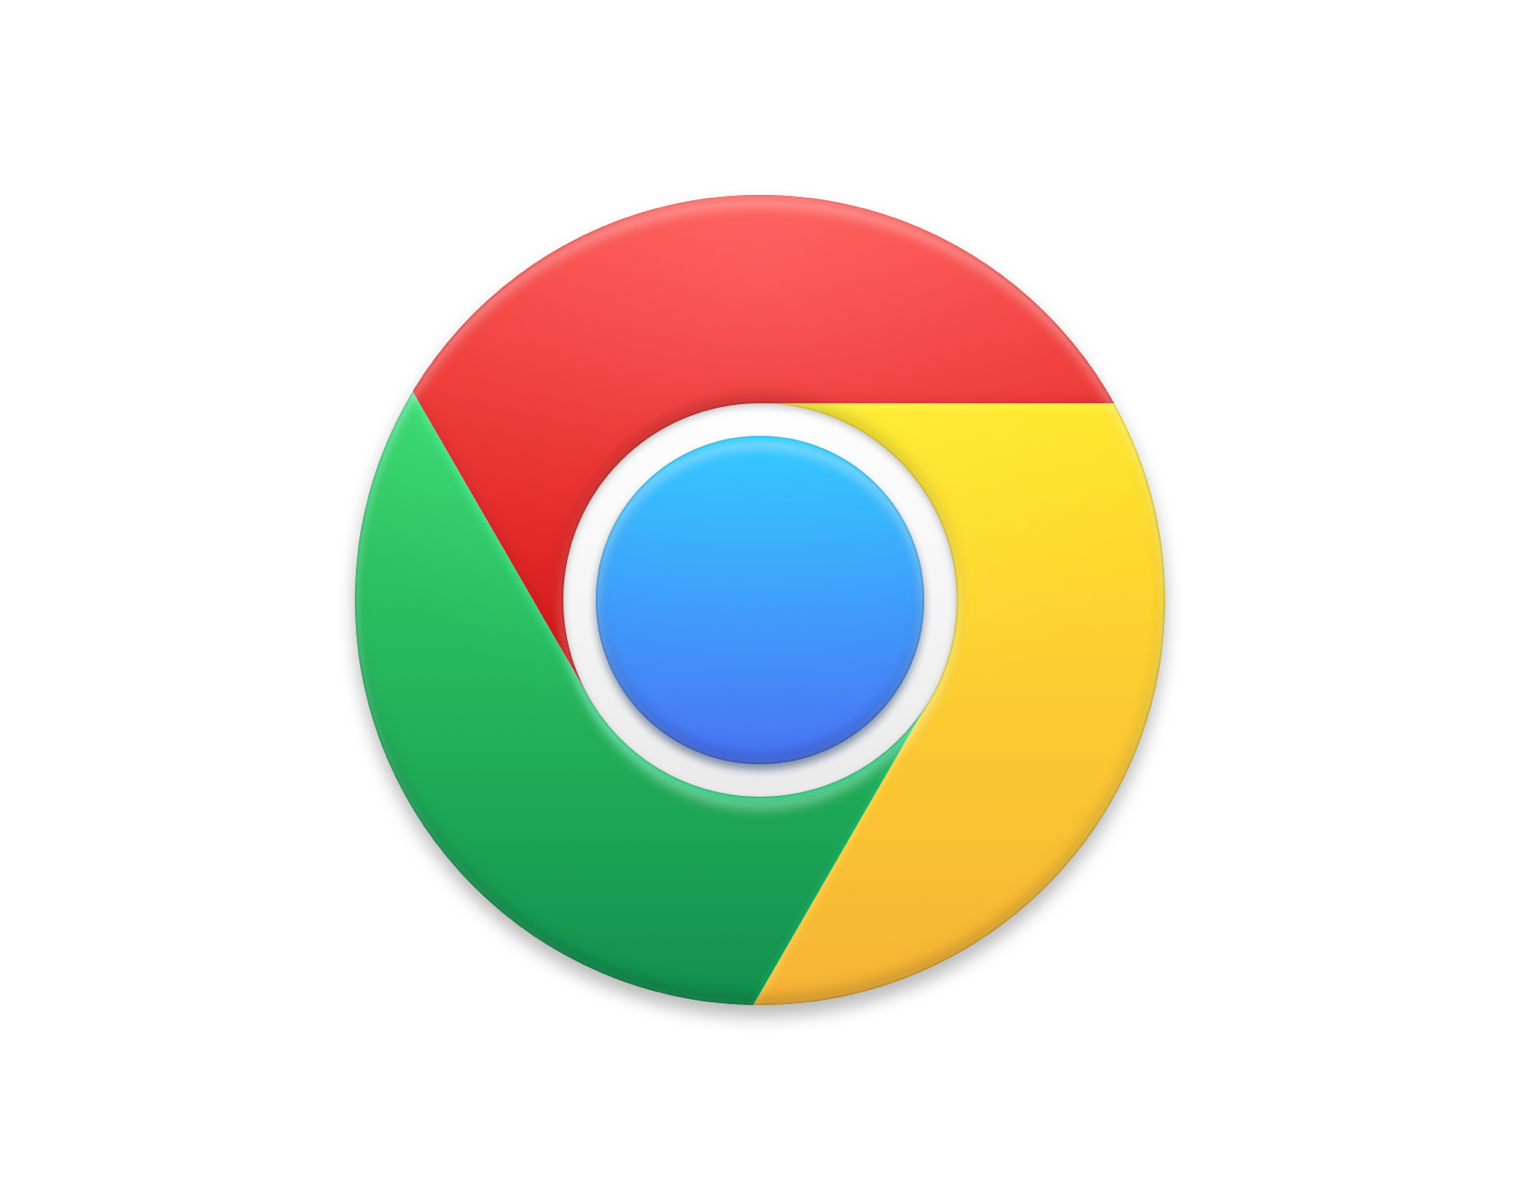 A Chrome for Mac icon replacement that looks at home on macOS 10.10+